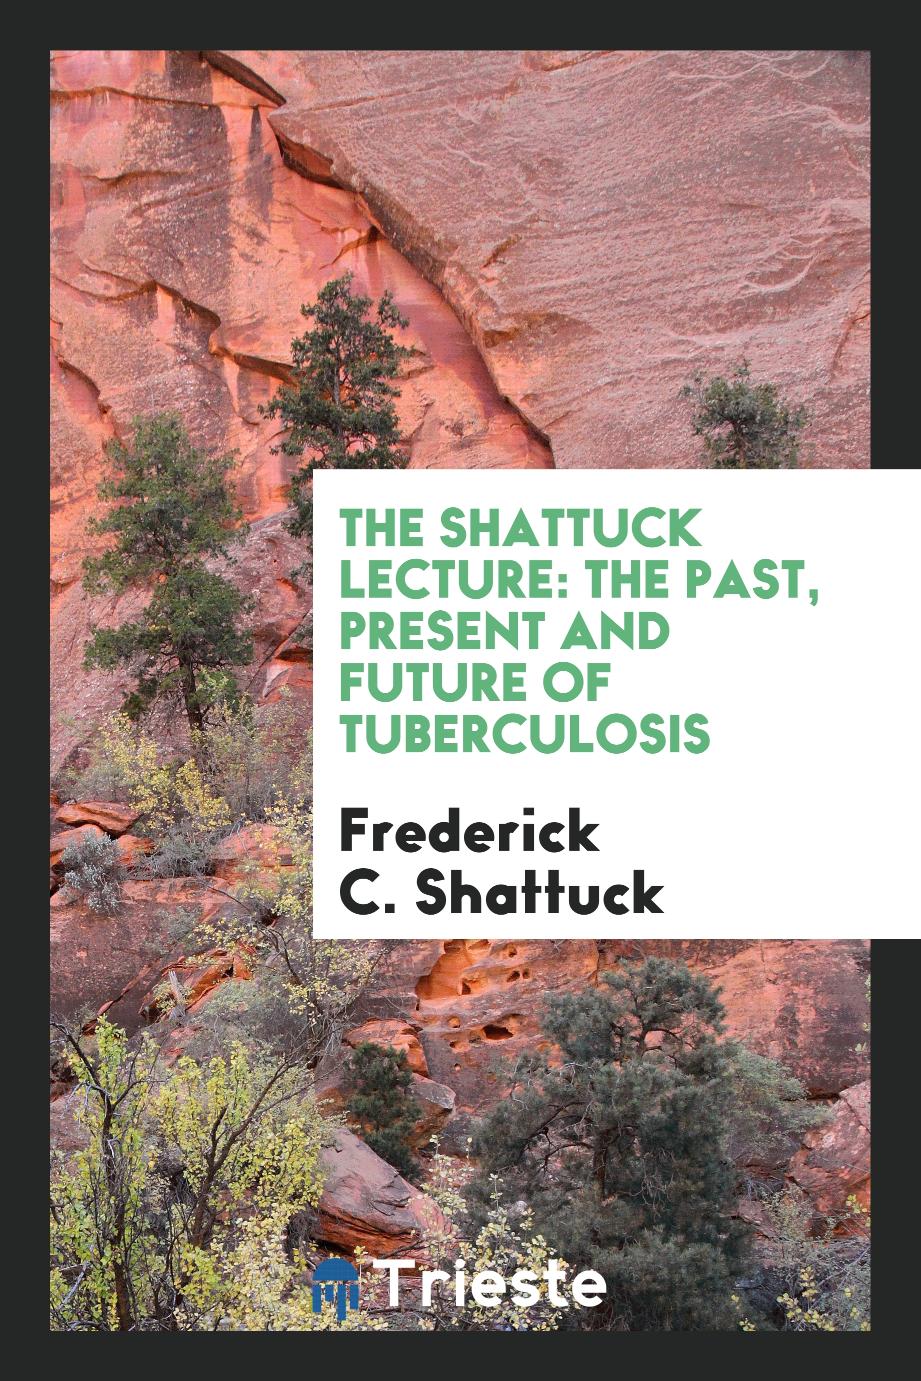 The Shattuck lecture: the past, present and future of tuberculosis